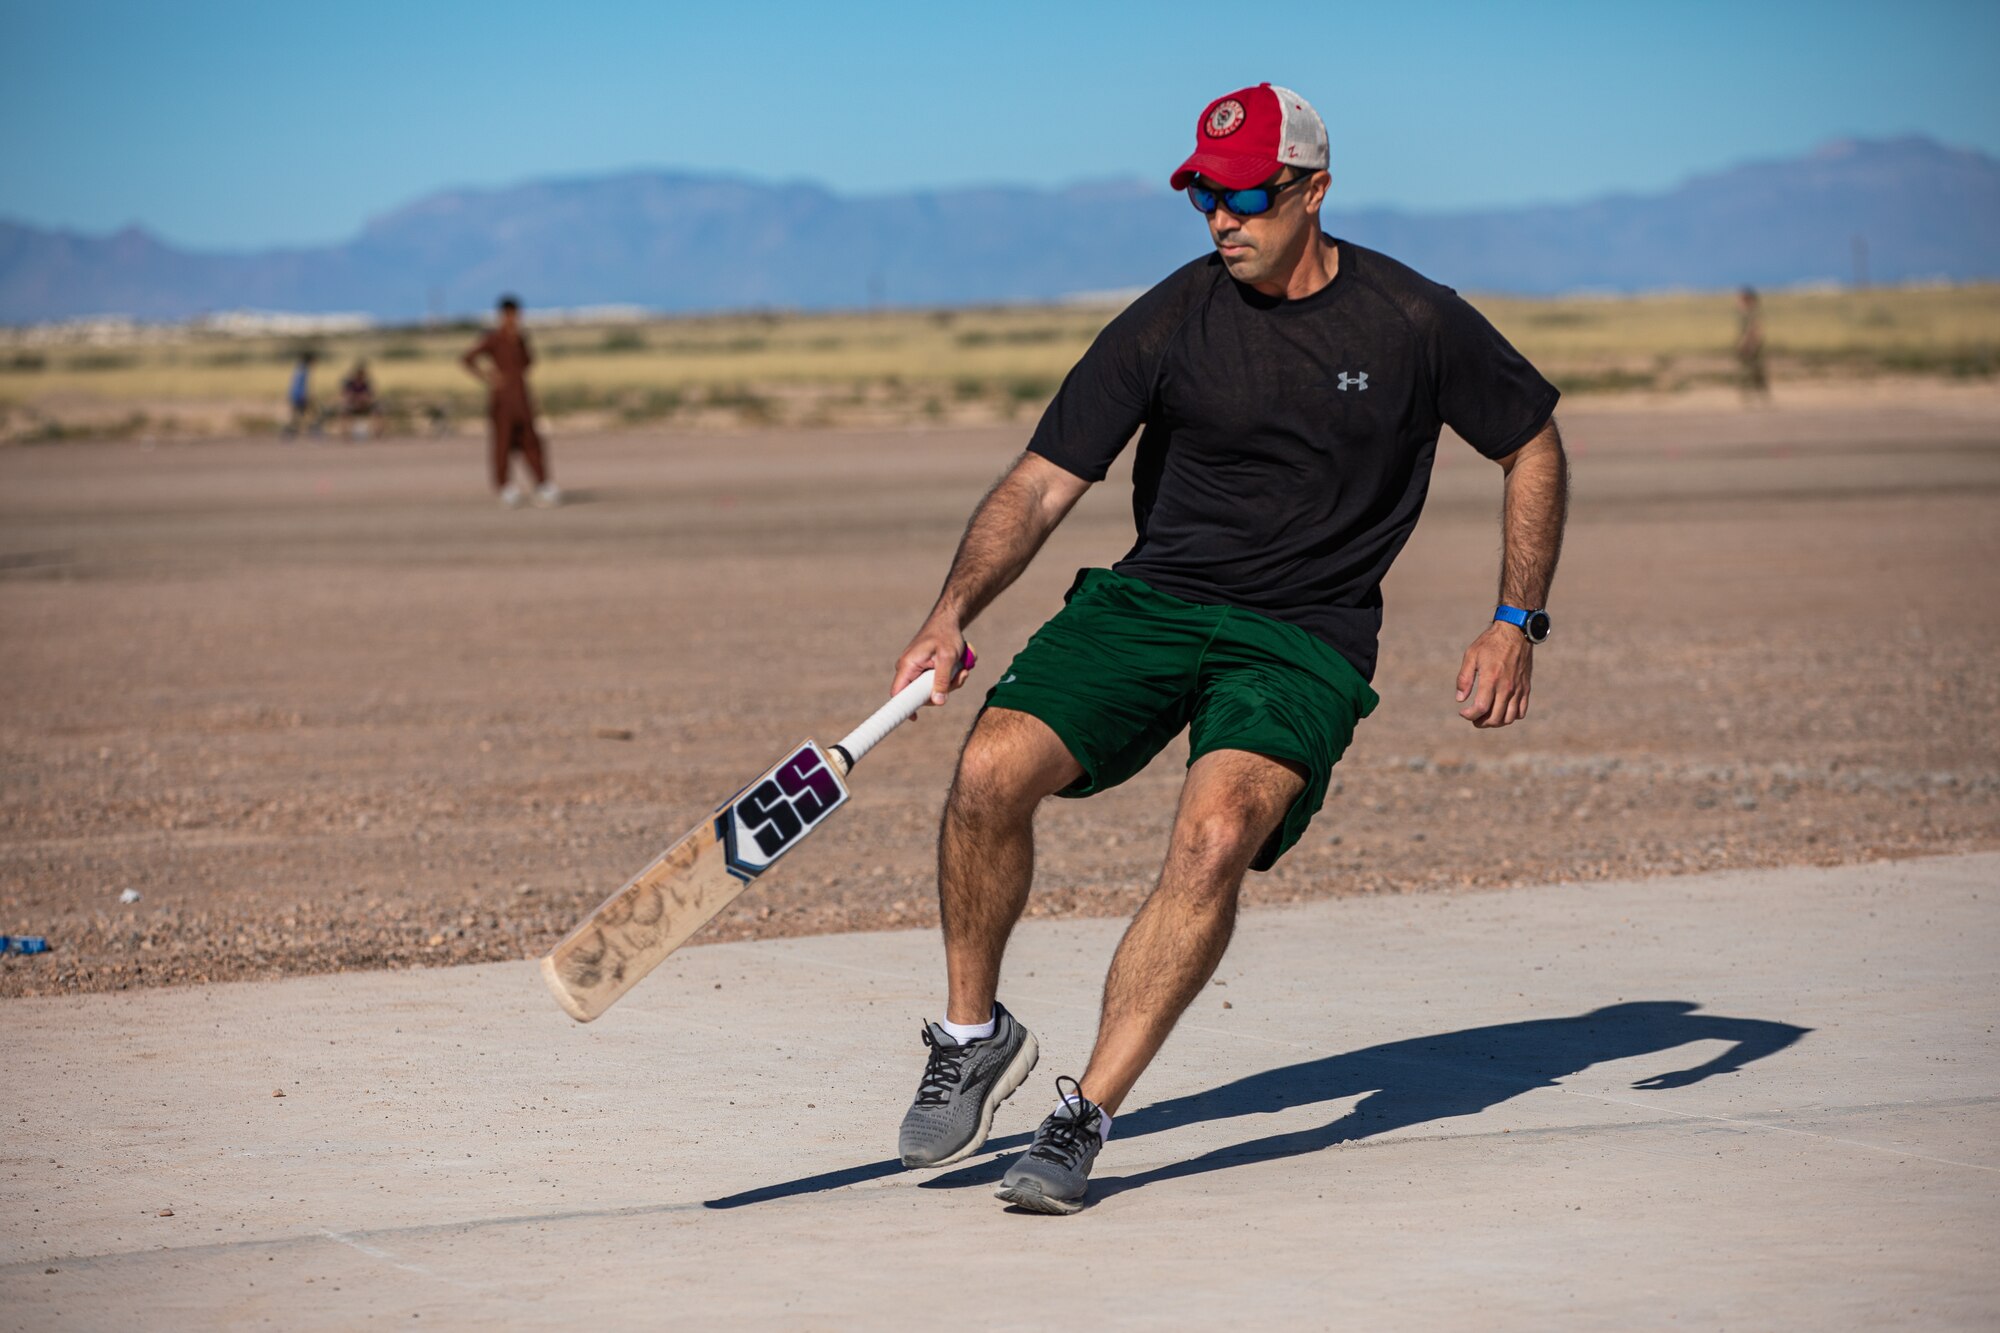 Lt. Col. Taylor Francis, Task Force-Holloman director of operations deployed from Seymour Johnson Air Force Base, North Carolina, rounds the cricket field during a cricket game between U.S. service members and Afghan evacuees at Aman Omid Village on Holloman Air Force Base, New Mexico, Oct. 9, 2021. The Department of Defense, through U.S. Northern Command, and in support of the Department of Homeland Security, is providing transportation, temporary housing, medical screening, and general support for at least 50,000 Afghan evacuees at suitable facilities, in permanent or temporary structures, as quickly as possible. This initiative provides Afghan personnel essential support at secure locations outside Afghanistan. (U.S. Army photo by Pfc. Anthony Sanchez)